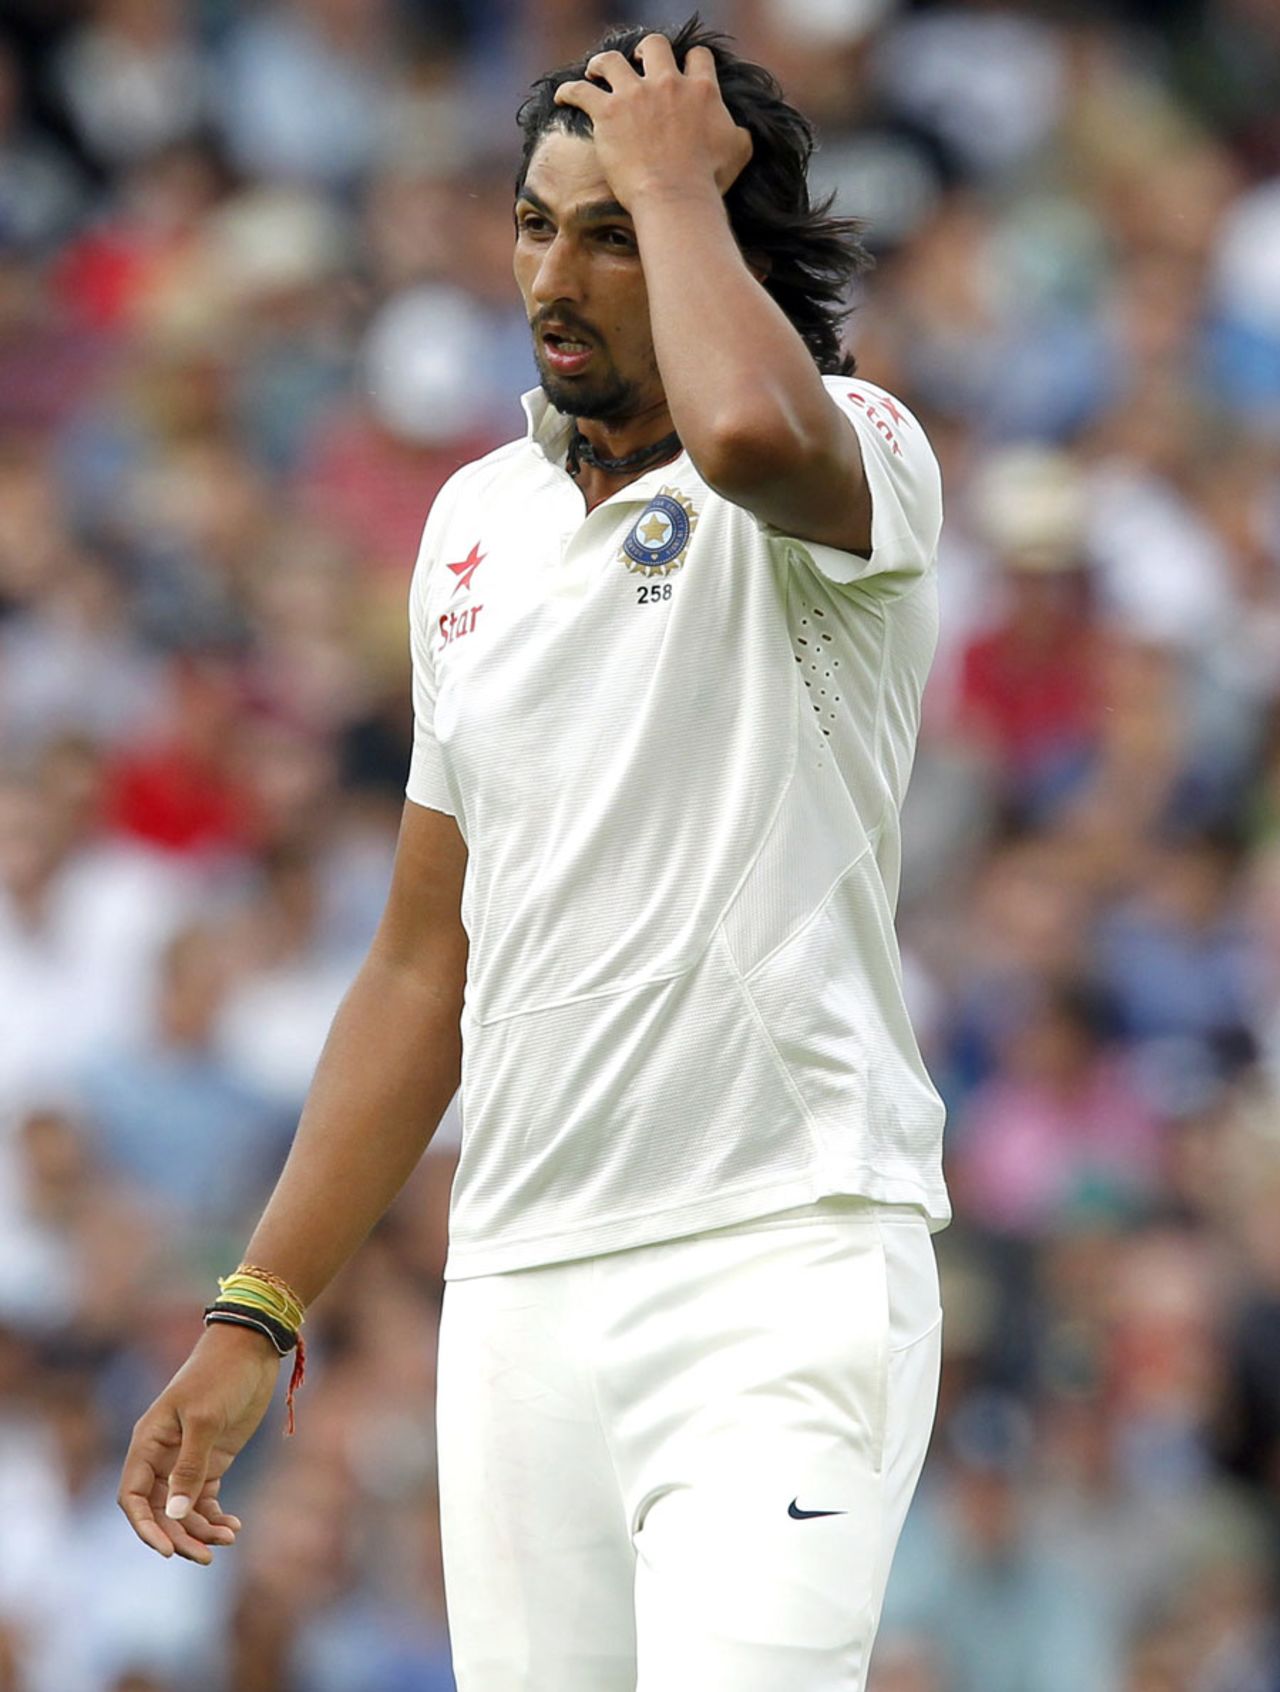 Ishant Sharma was made to toil for his four wickets, England v India, 5th Investec Test, The Oval, 3rd day, August 17, 2014